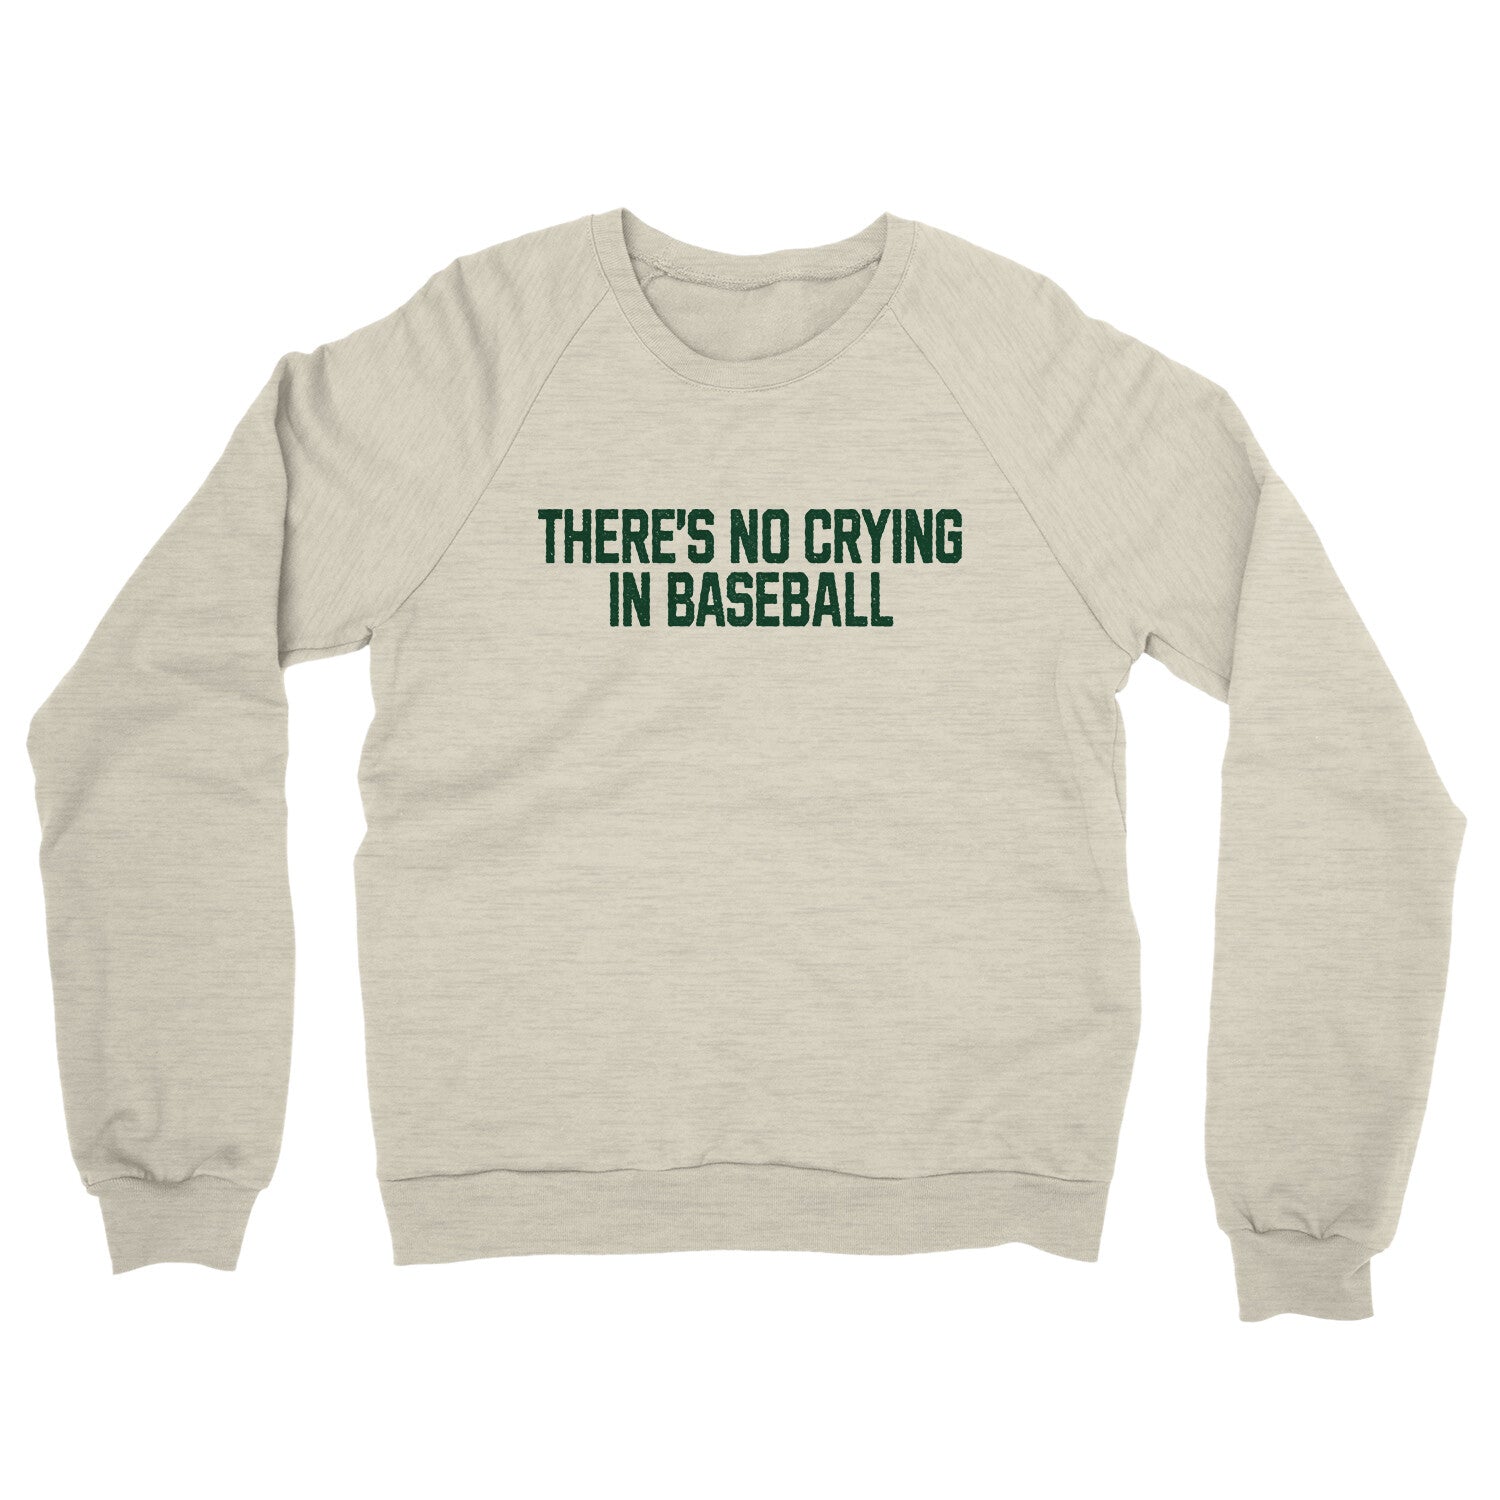 There's No Crying in Baseball in Heather Oatmeal Color